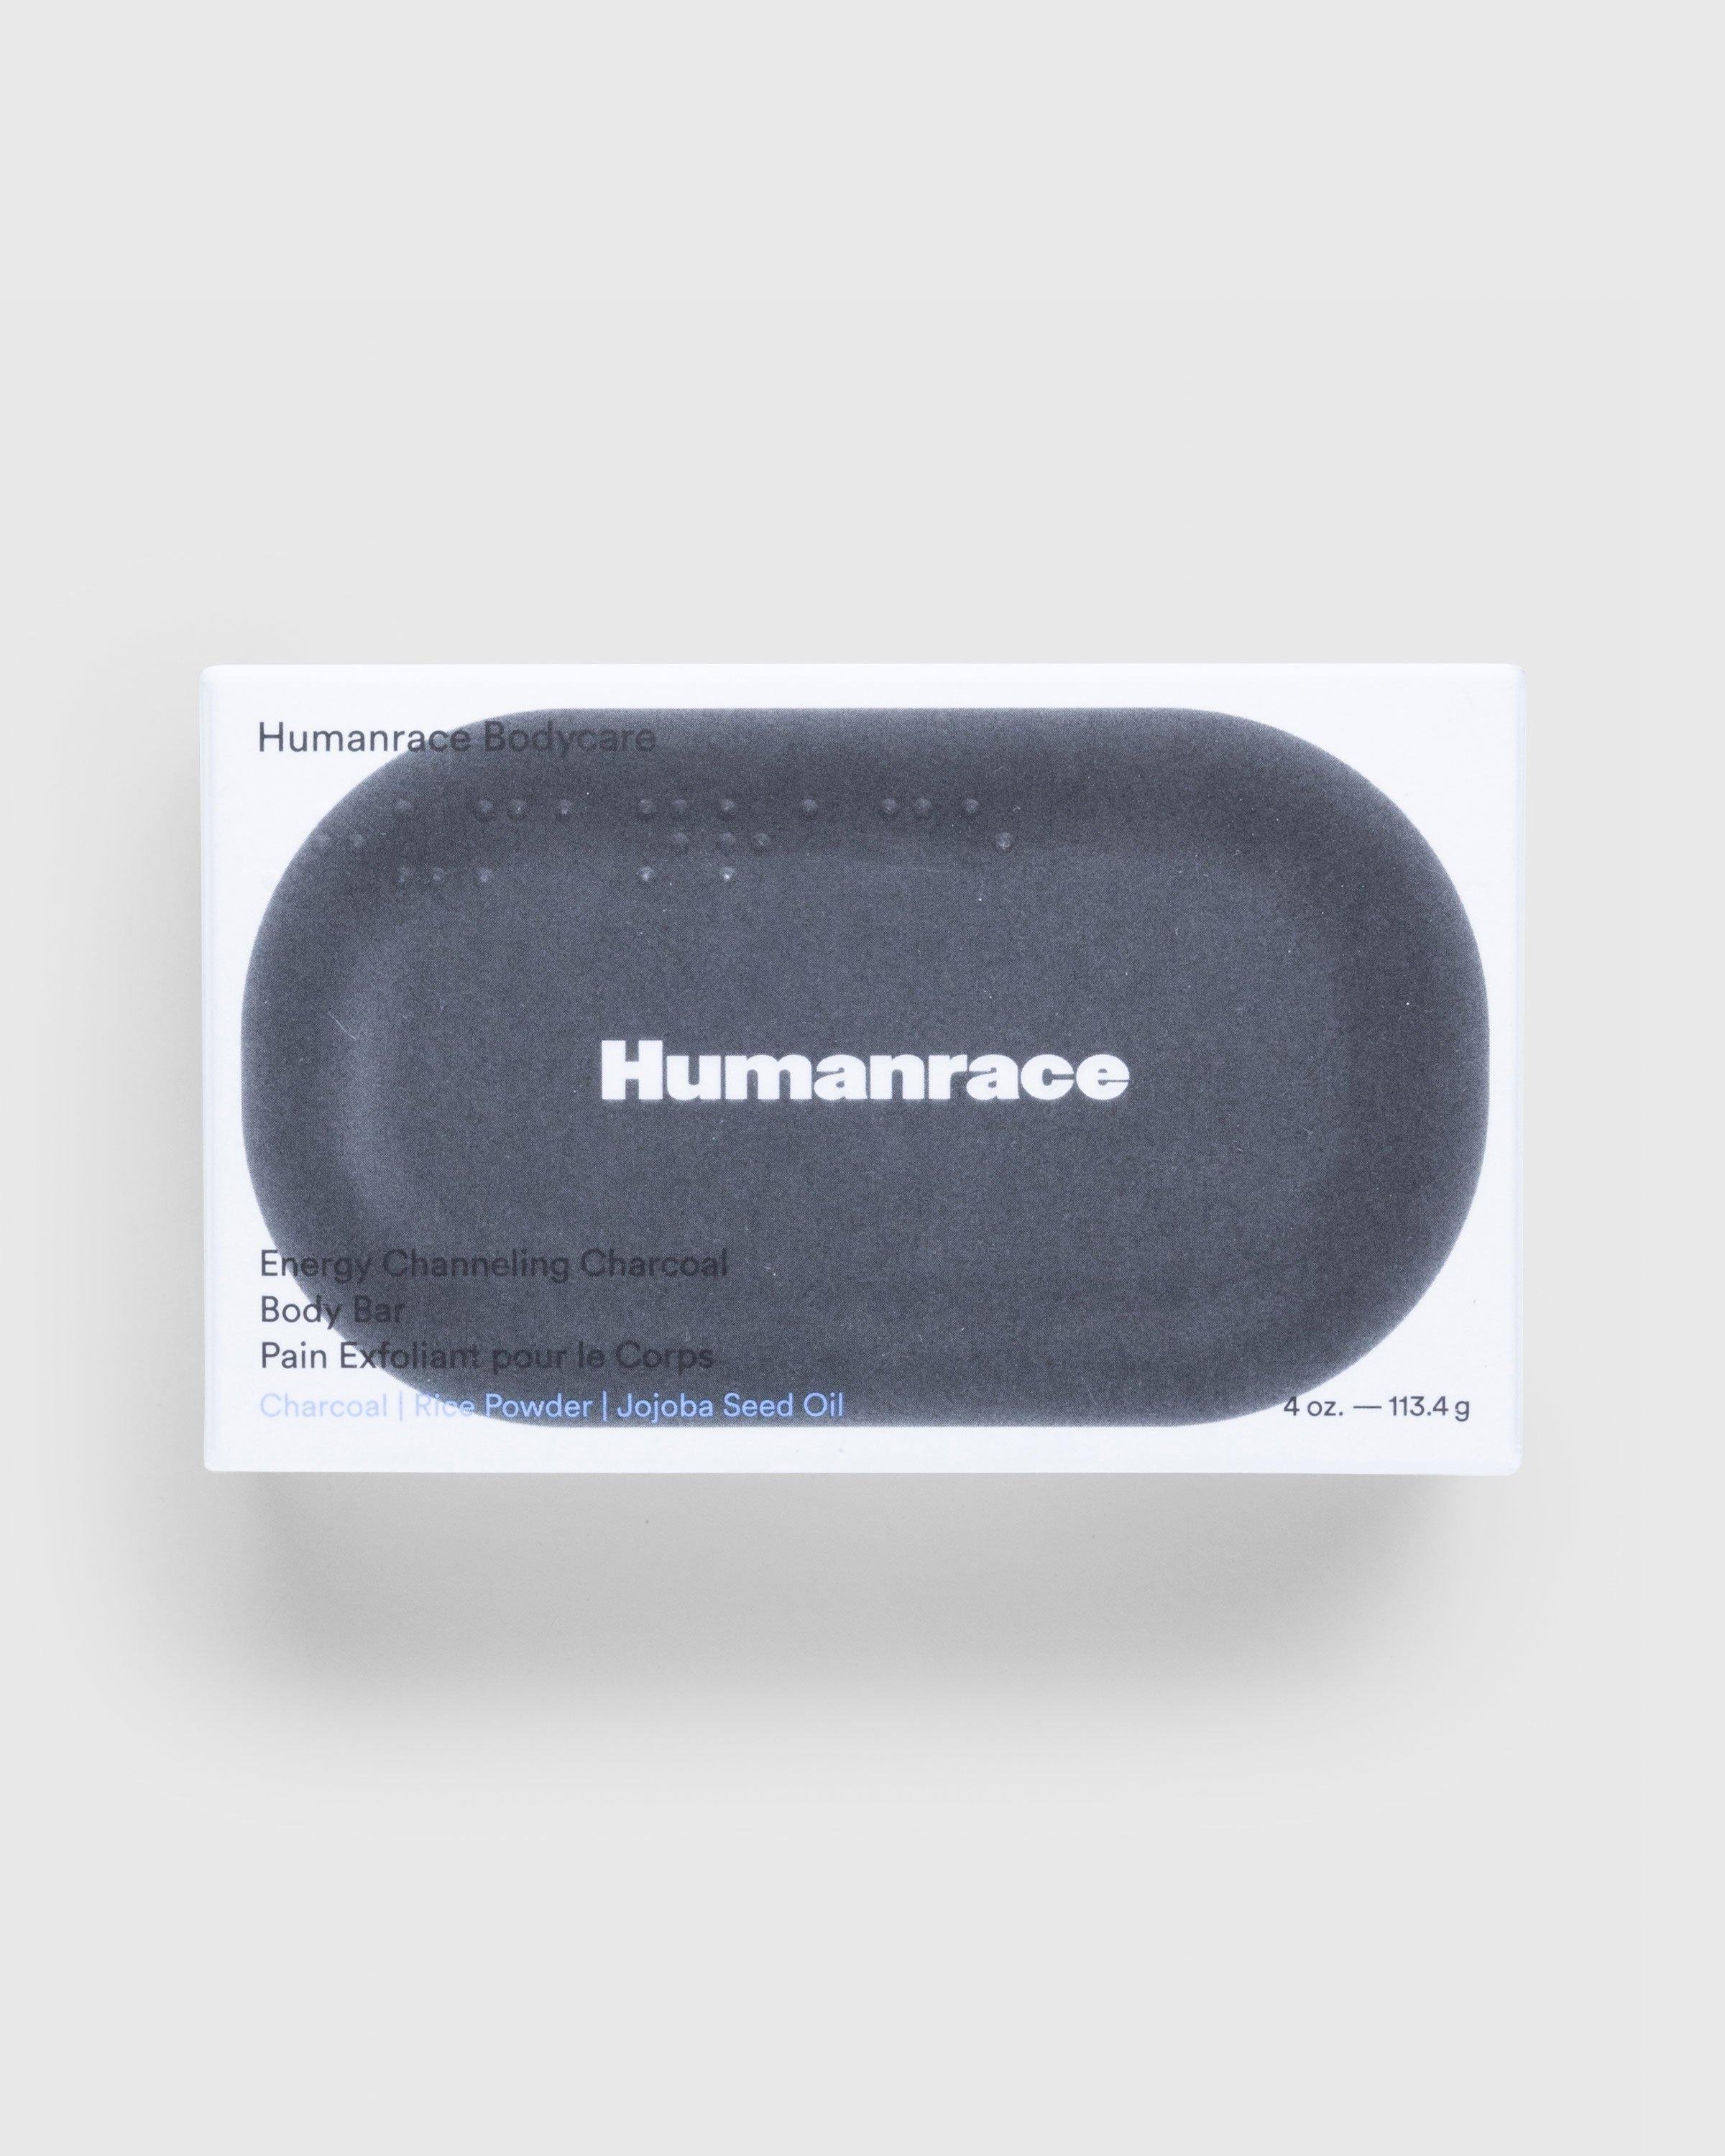 HumanraceEnergy Channeling Charcoal Body Bar by HIGHSNOBIETY